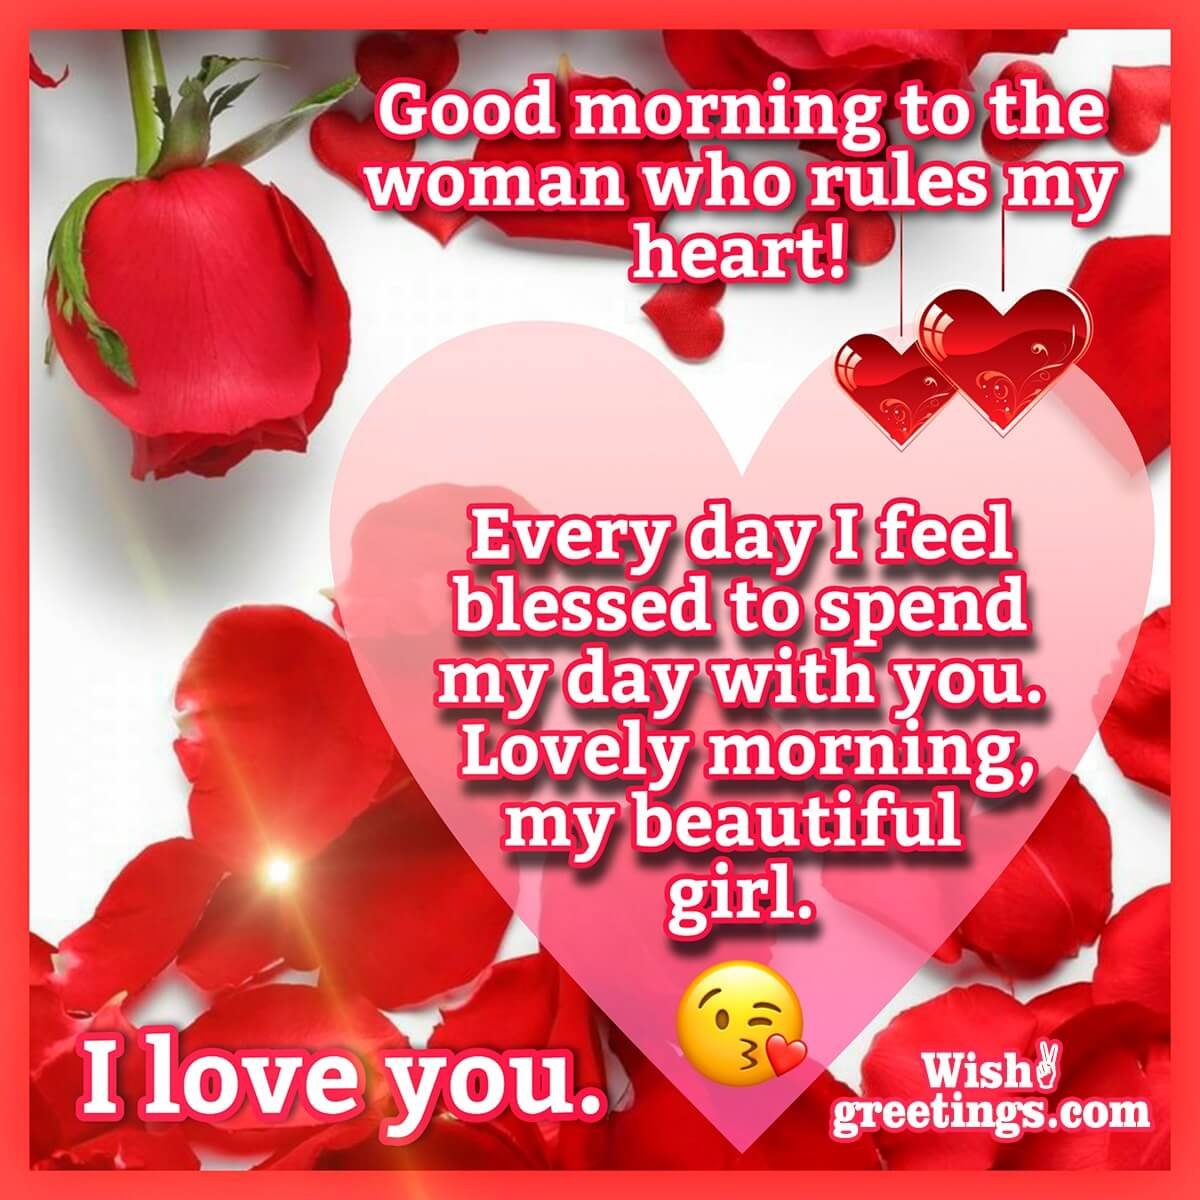 Buy > good morning i love you wife > Very cheap -“><figcaption class=